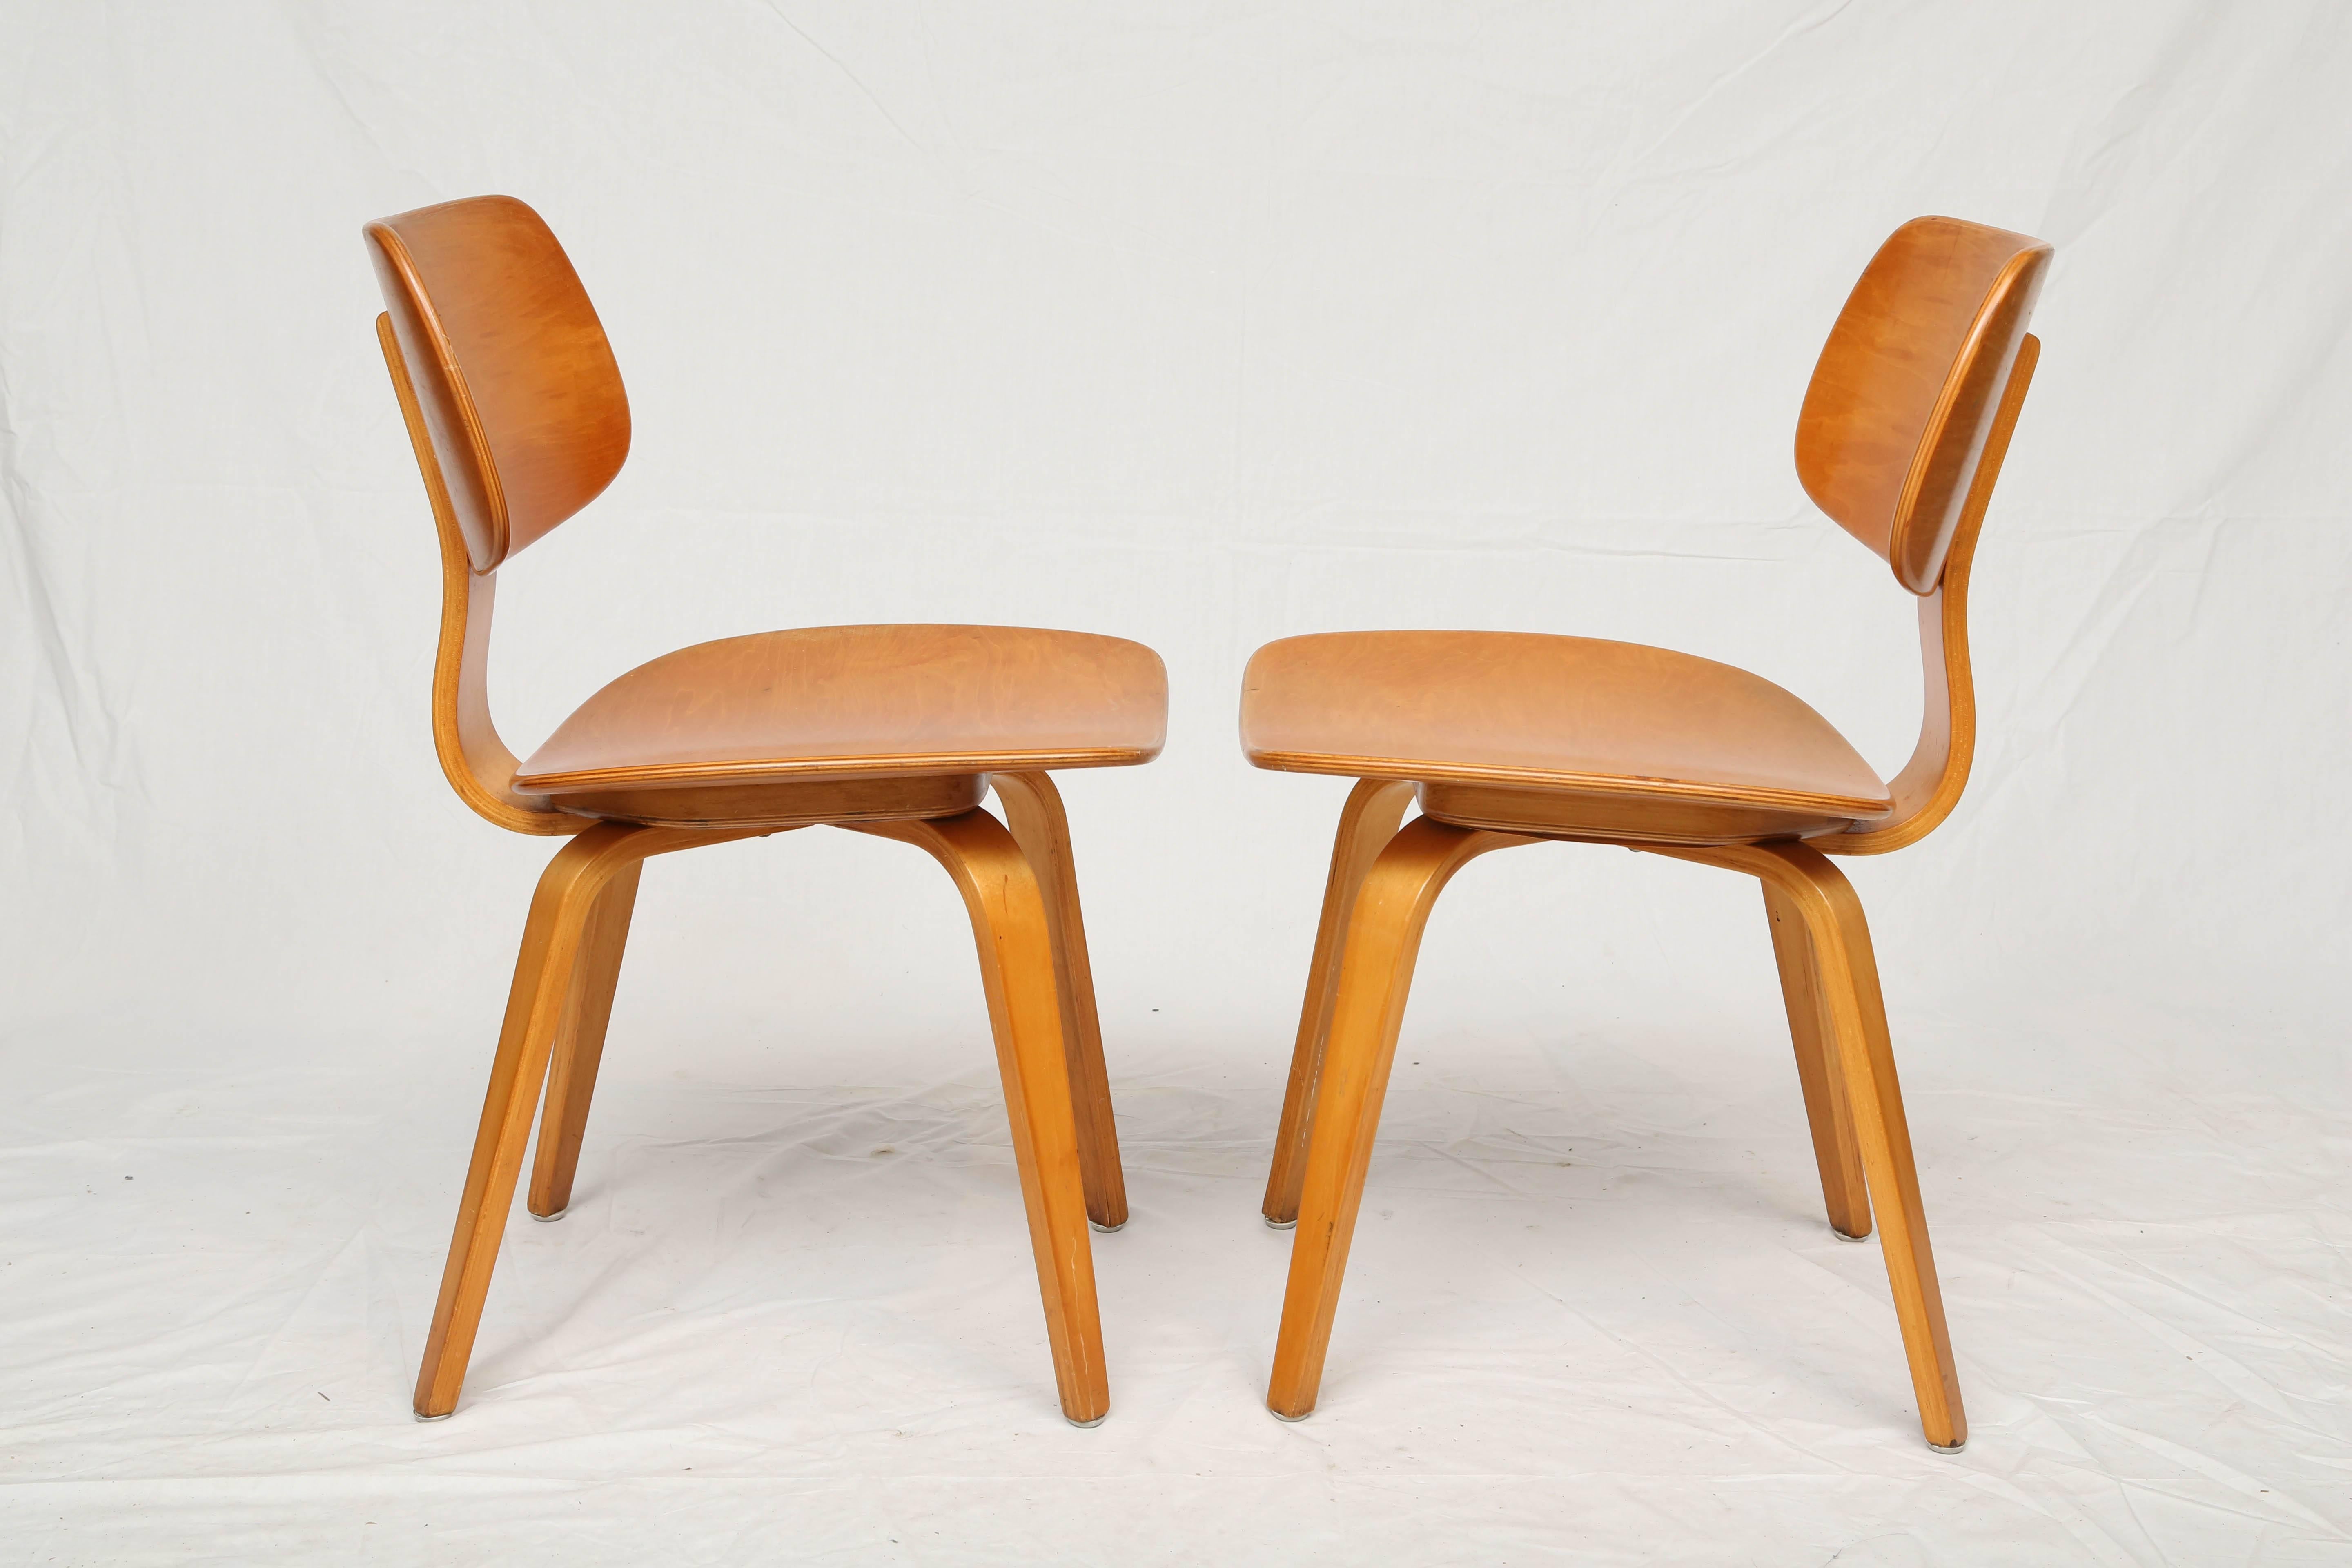 Molded Pair of Vintage Bentwood Sidechairs by Michael Thonet